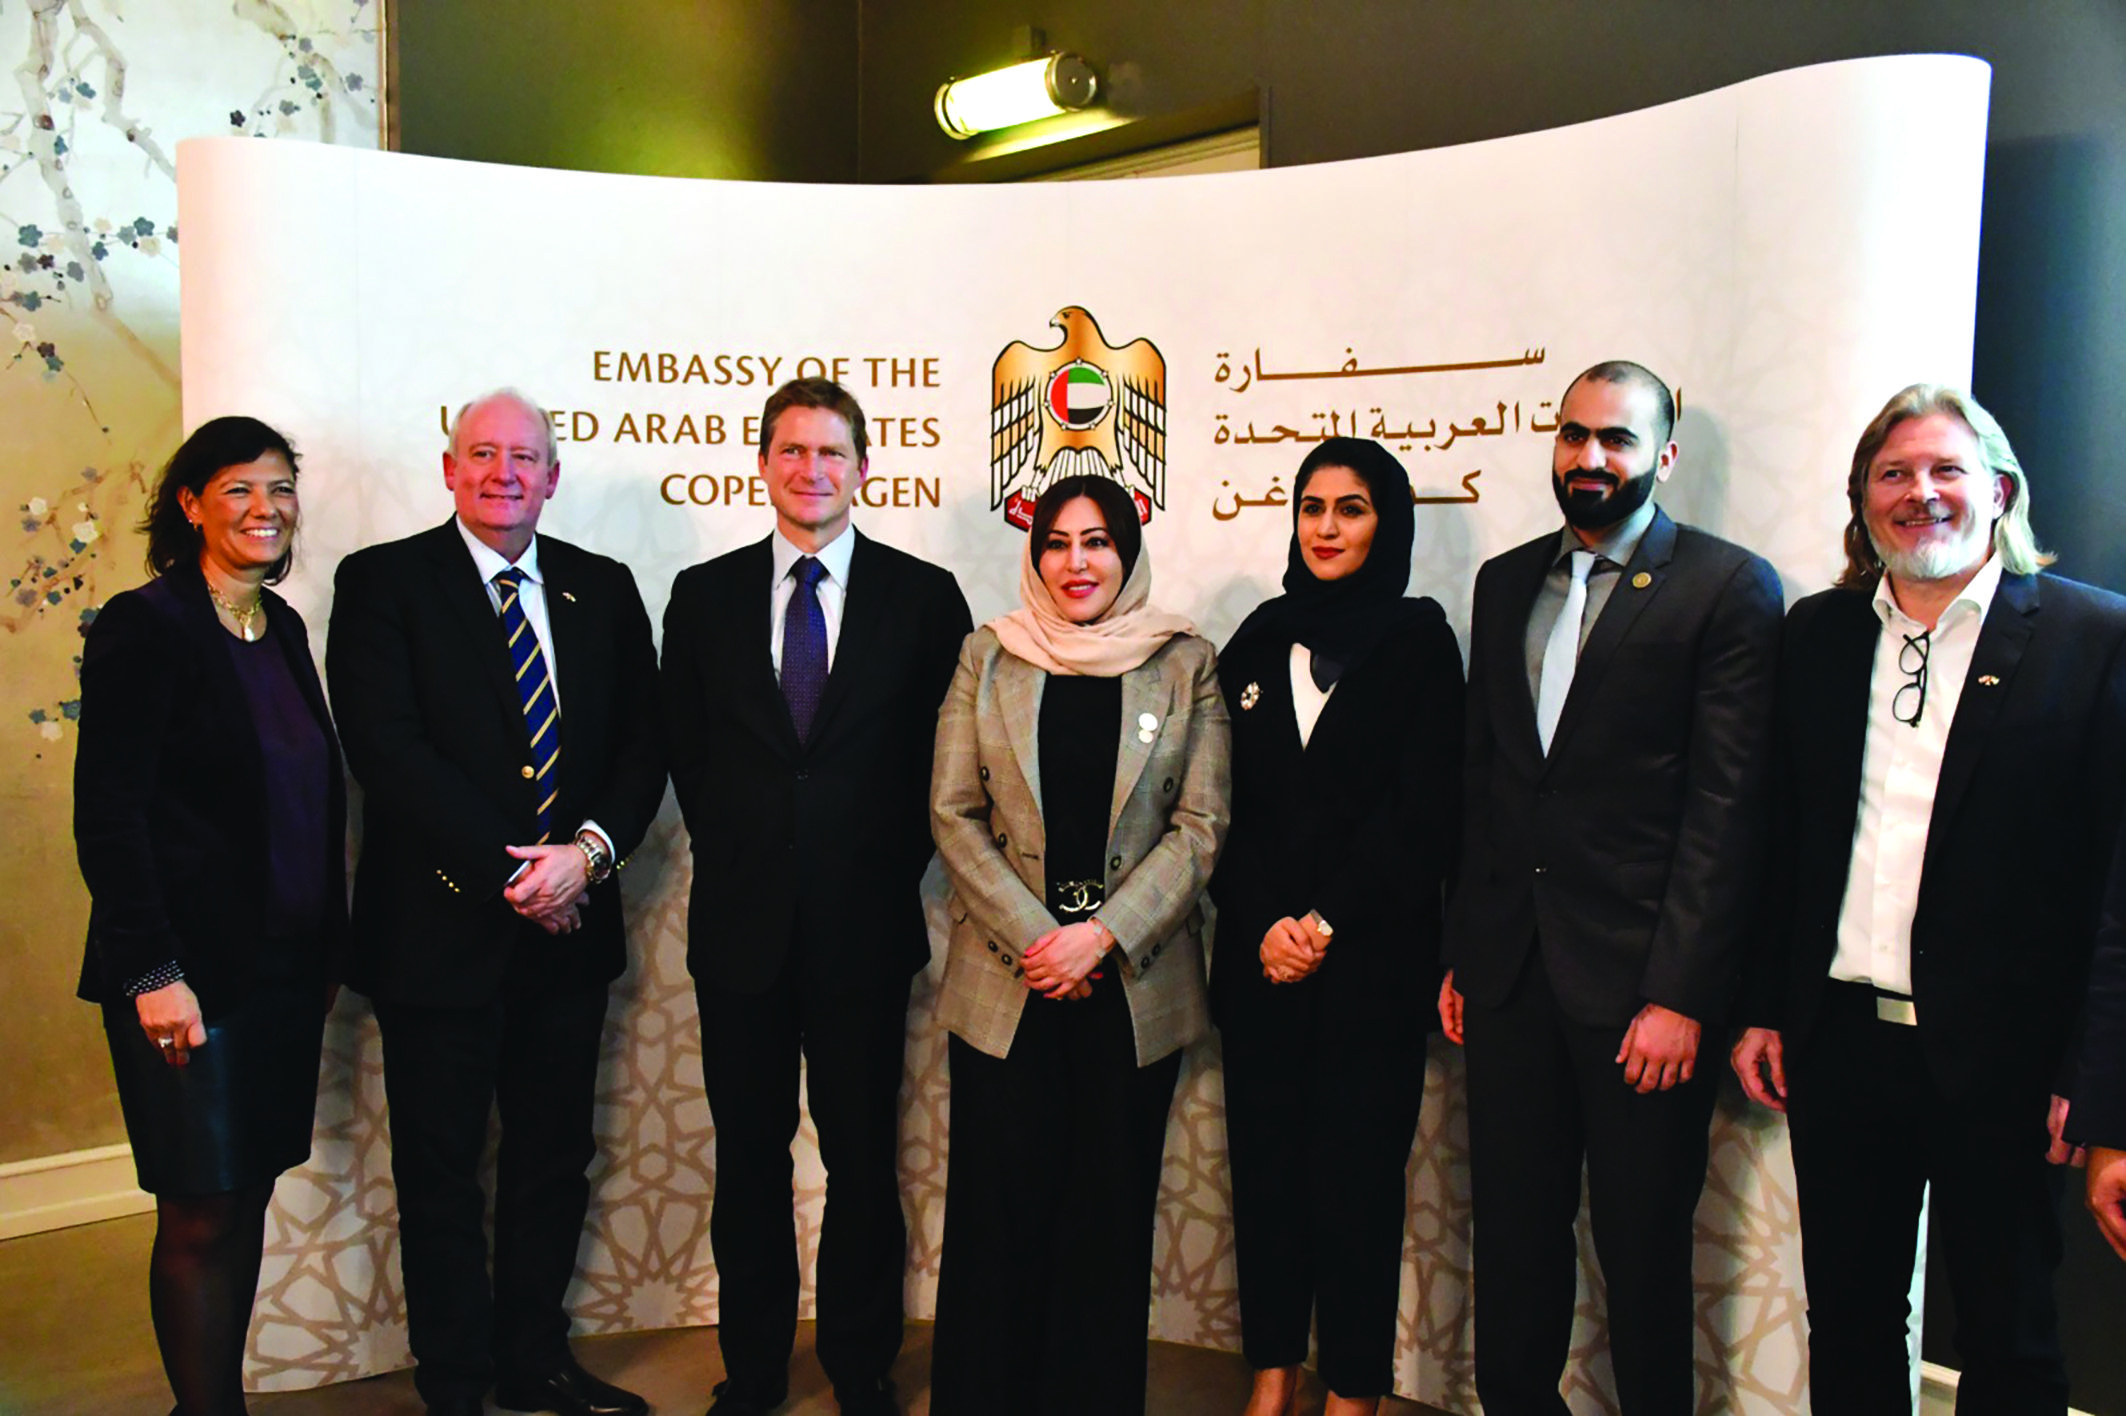 International Round-Up: Danish pavilion at the world exhibition in the UAE was a “ridiculous” affair, claims participant